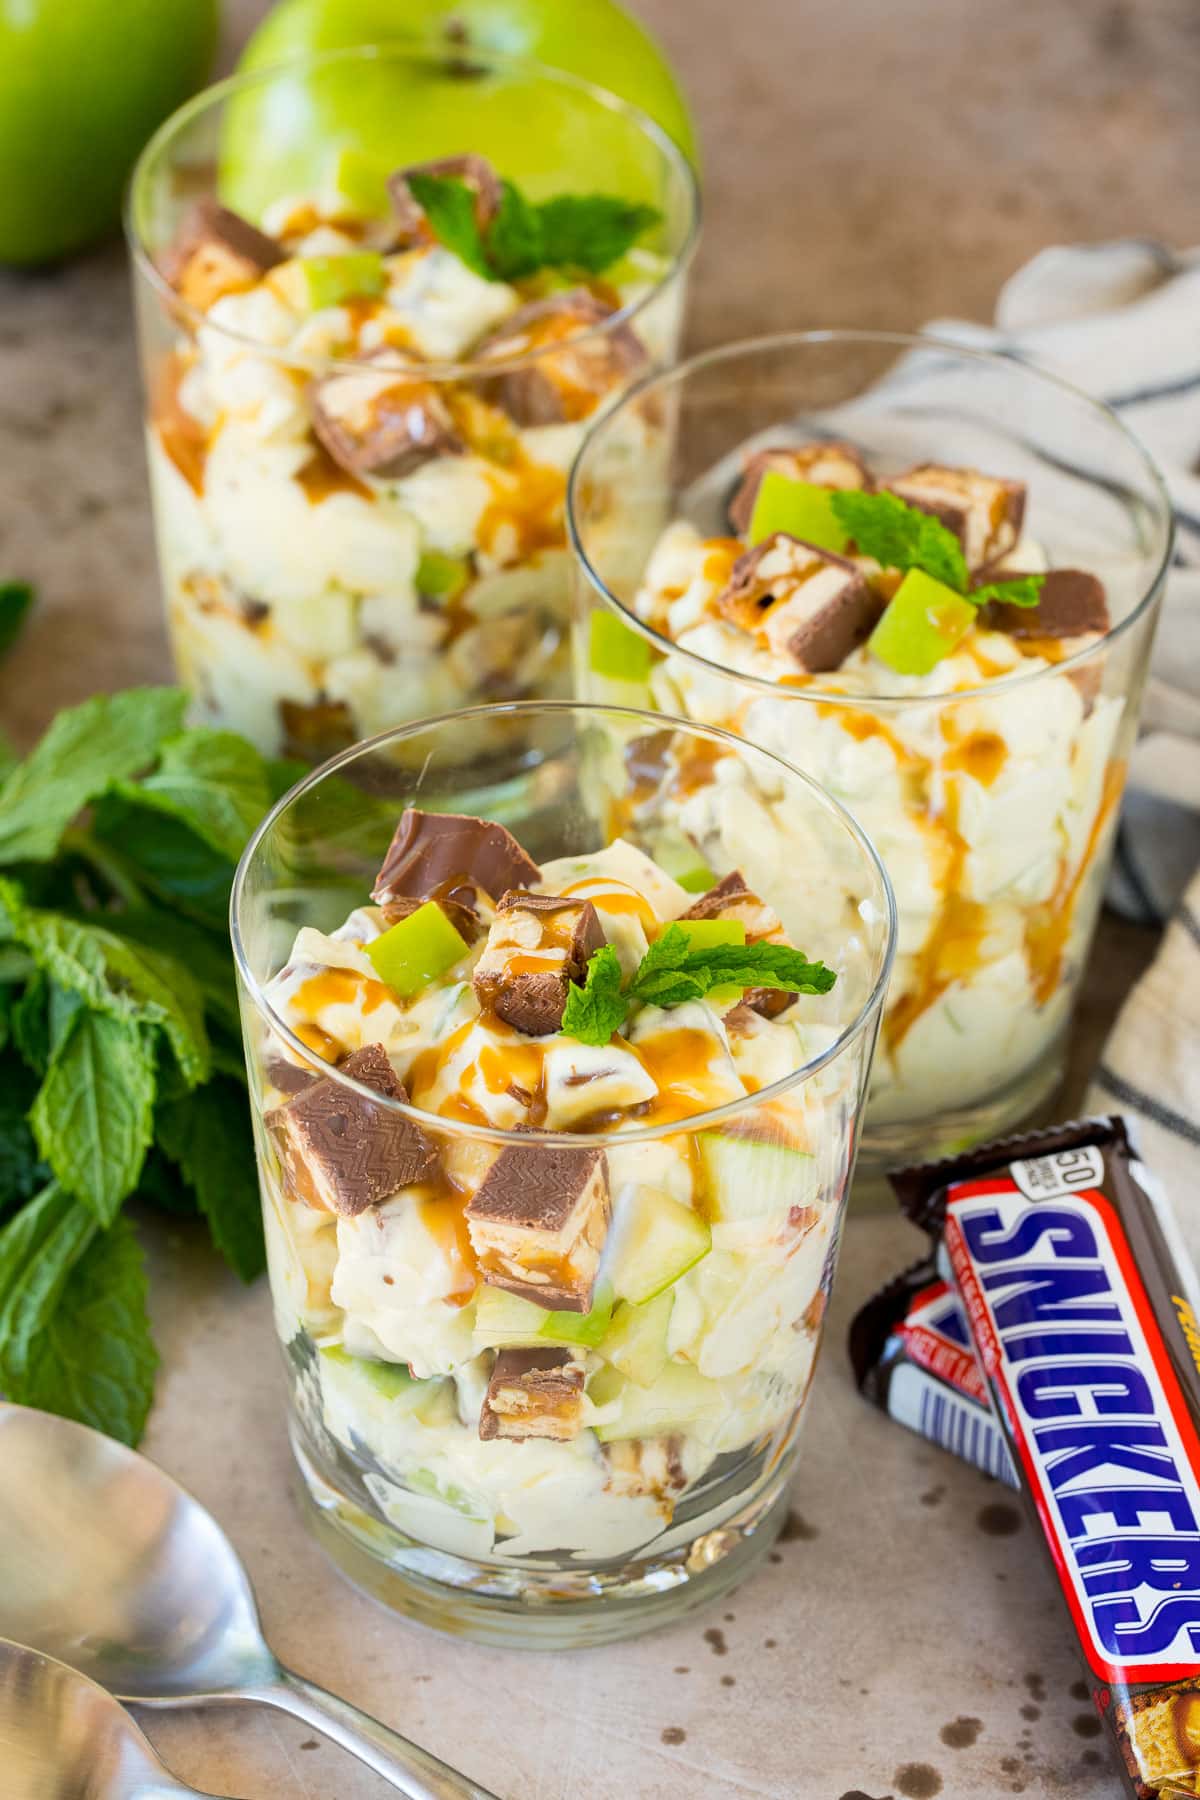 Individual servings of snicker apple salad garnished with caramel and mint.